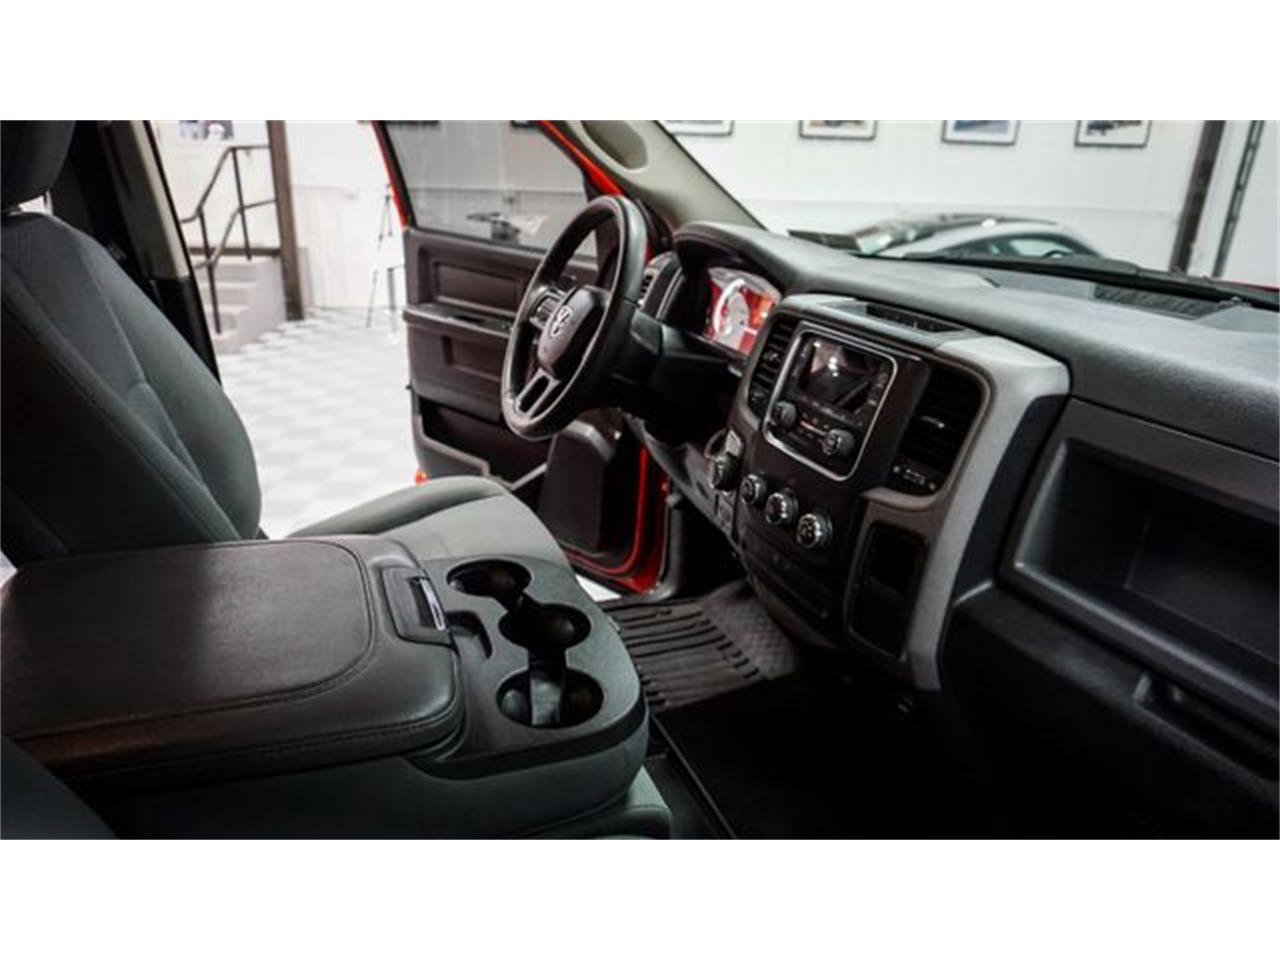 2016 Dodge Ram 1500 for sale in North East, PA – photo 44